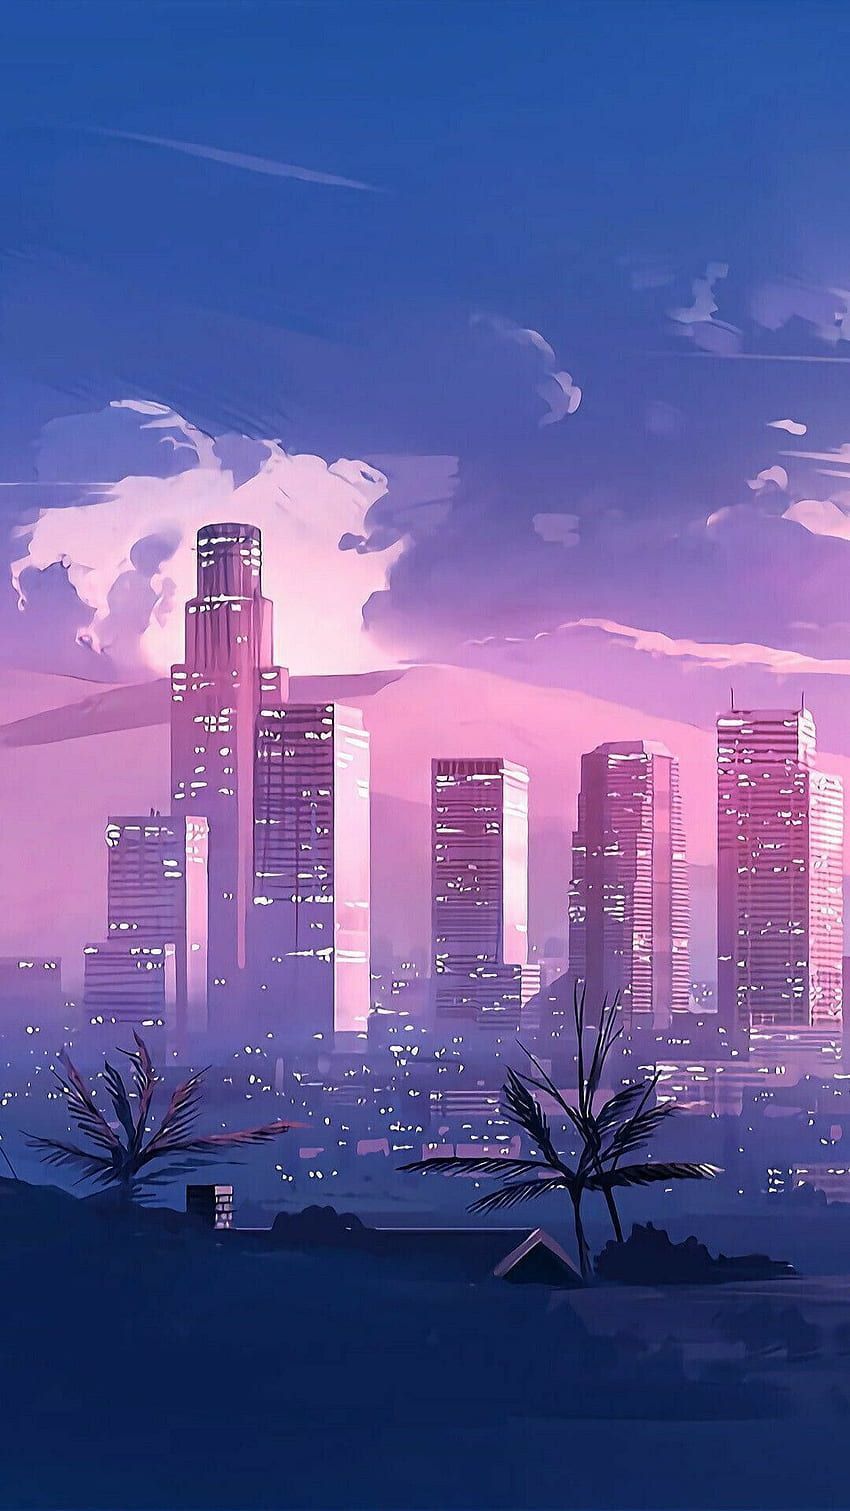 IPhone wallpaper of a cityscape with pink and purple hues - Cityscape, skyline